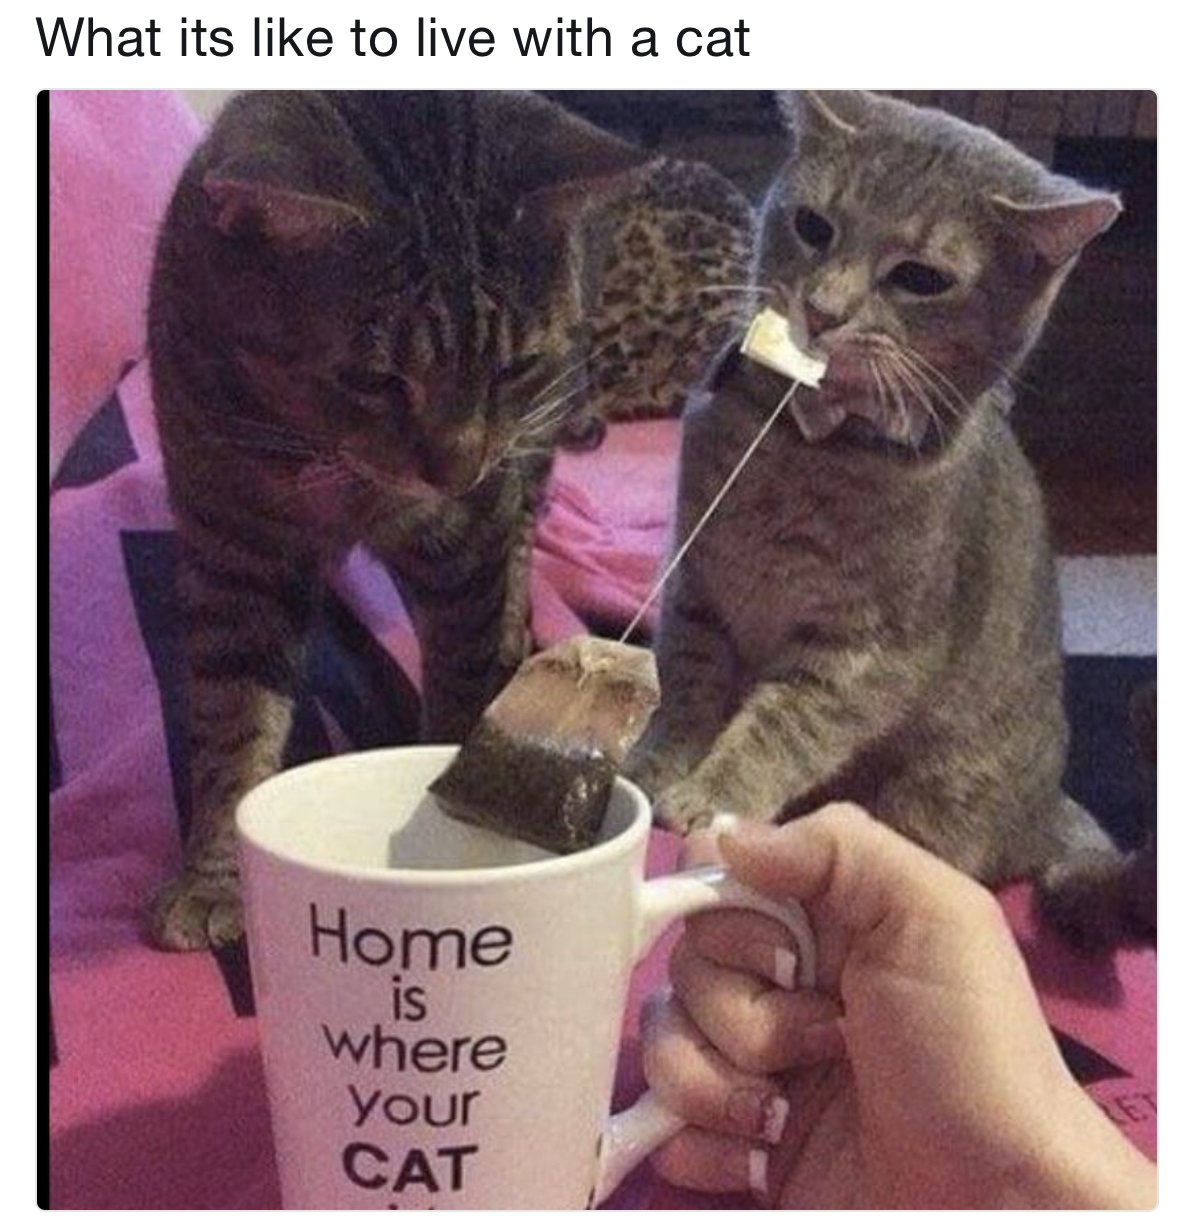 cat with a tea bag - What its to live with a cat Home where Your is Cat